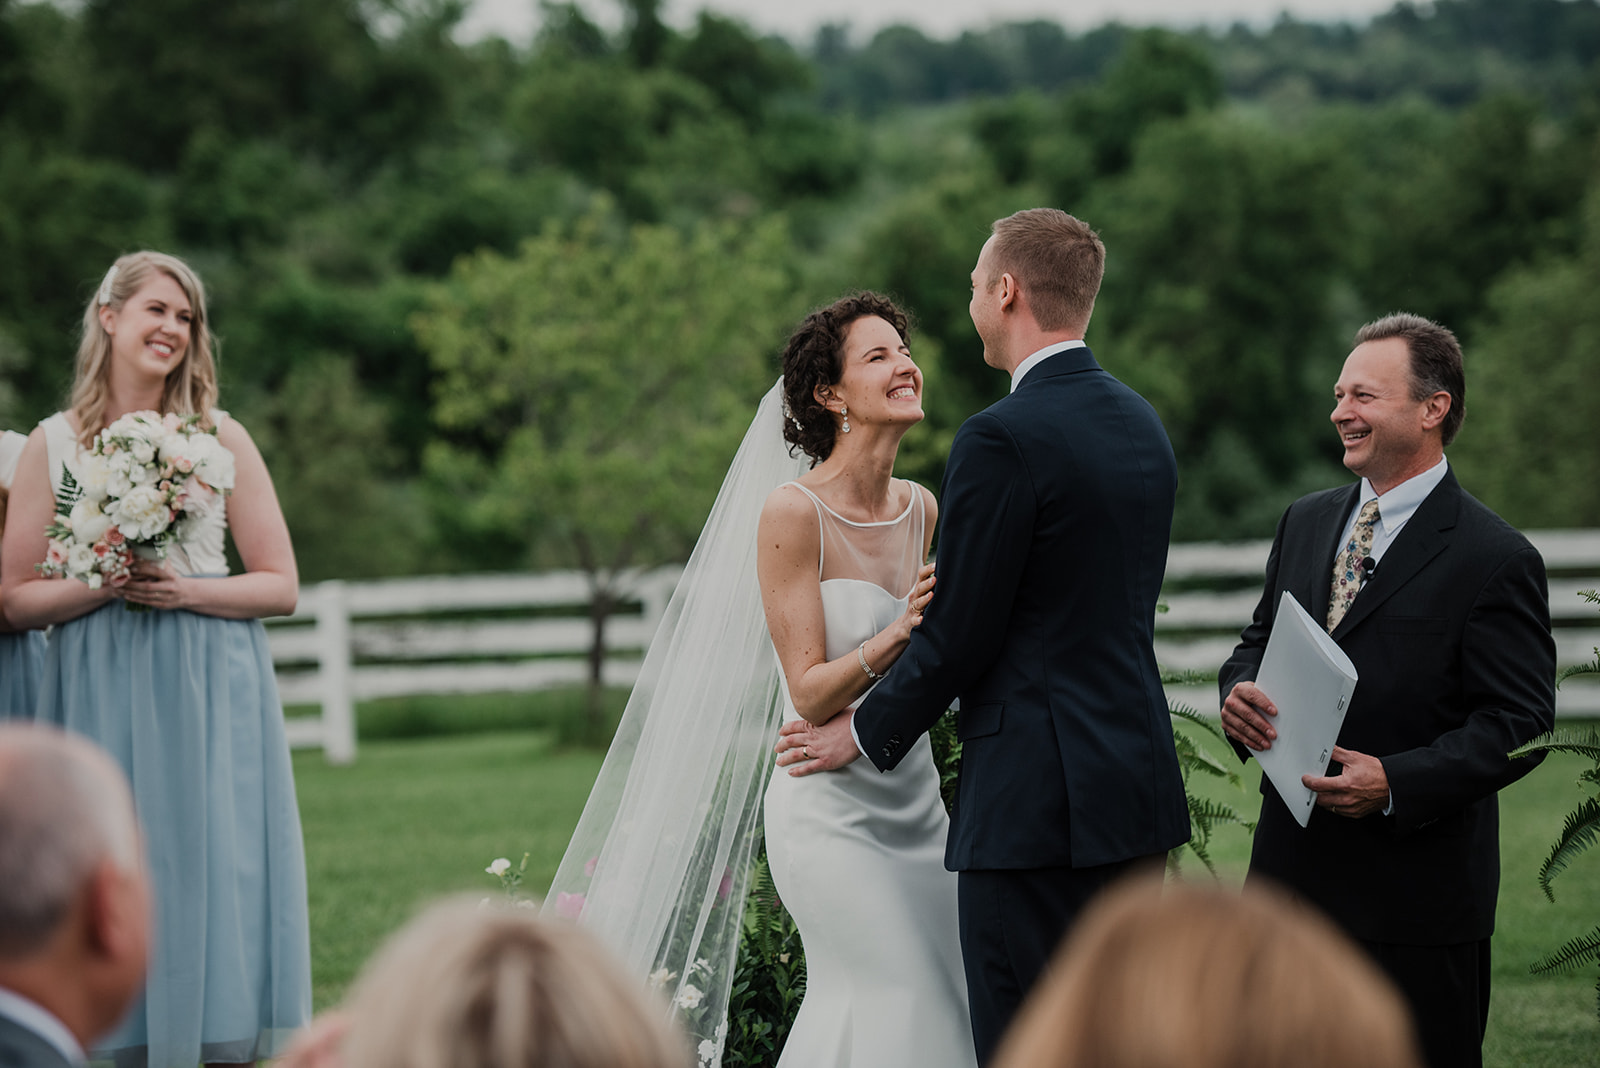 A newly pronounced husband and wife are all smiles during their outdoor wedding ceremony at Blue Hill Farm in Waterford, VA.